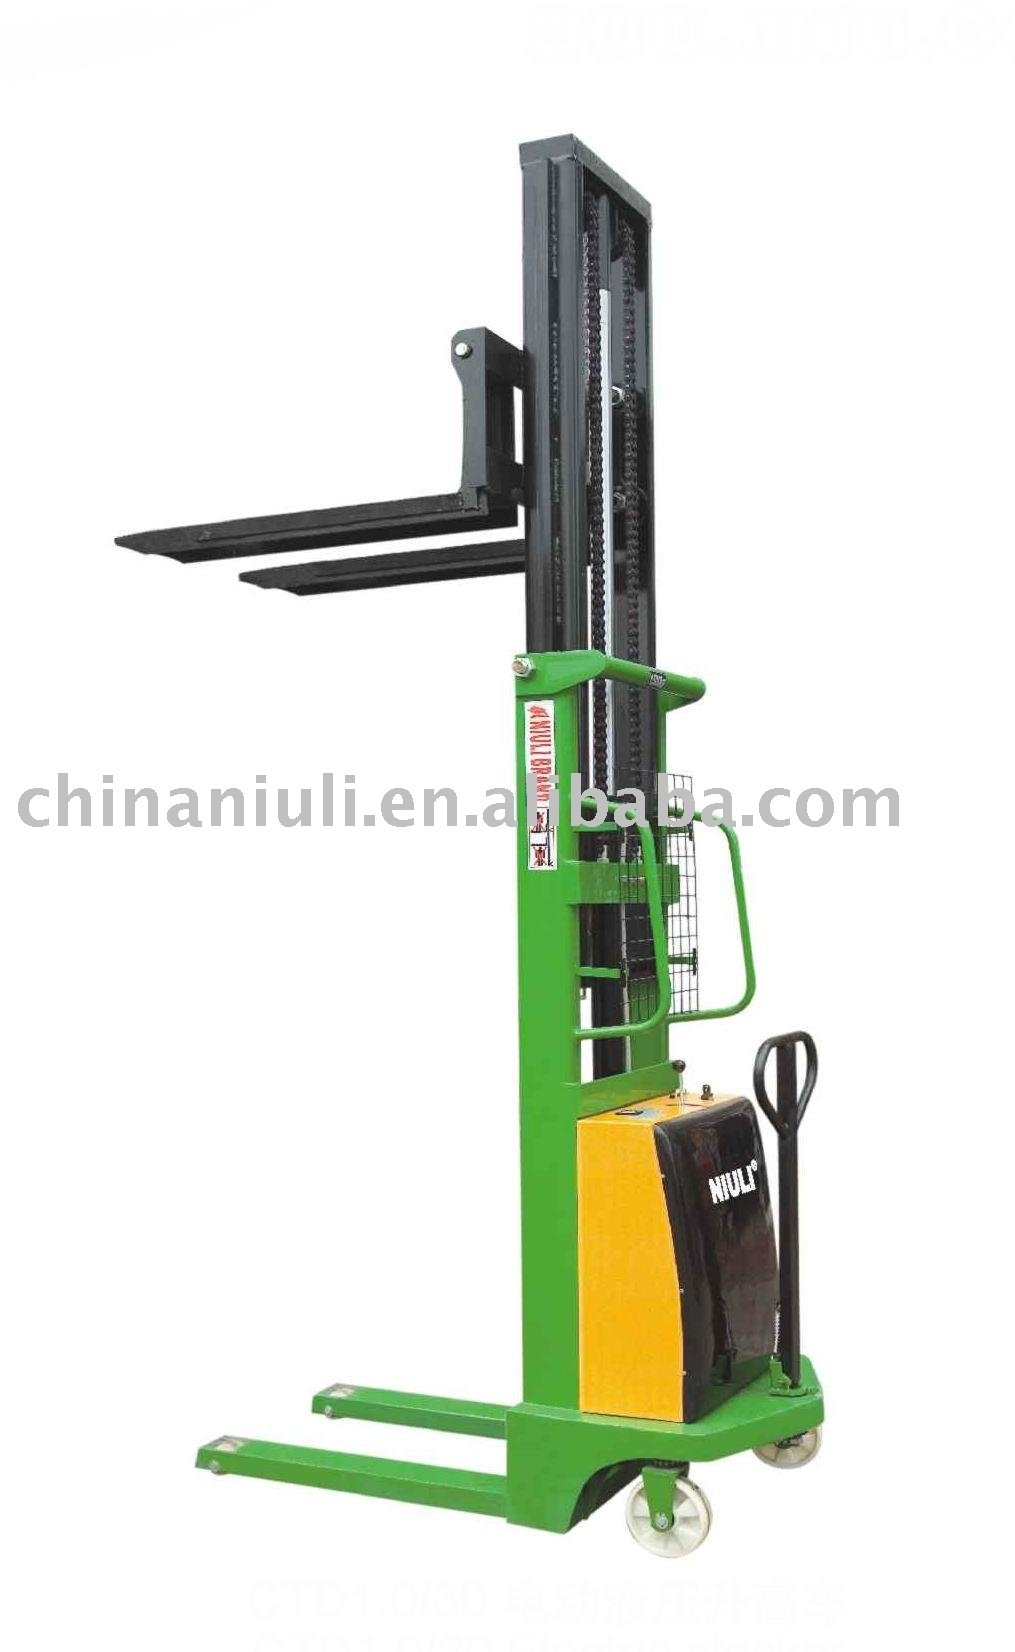 Self Loading Pallet Stacker 1.5t Reach Semi Electric Hydraulic Stacker Forklift